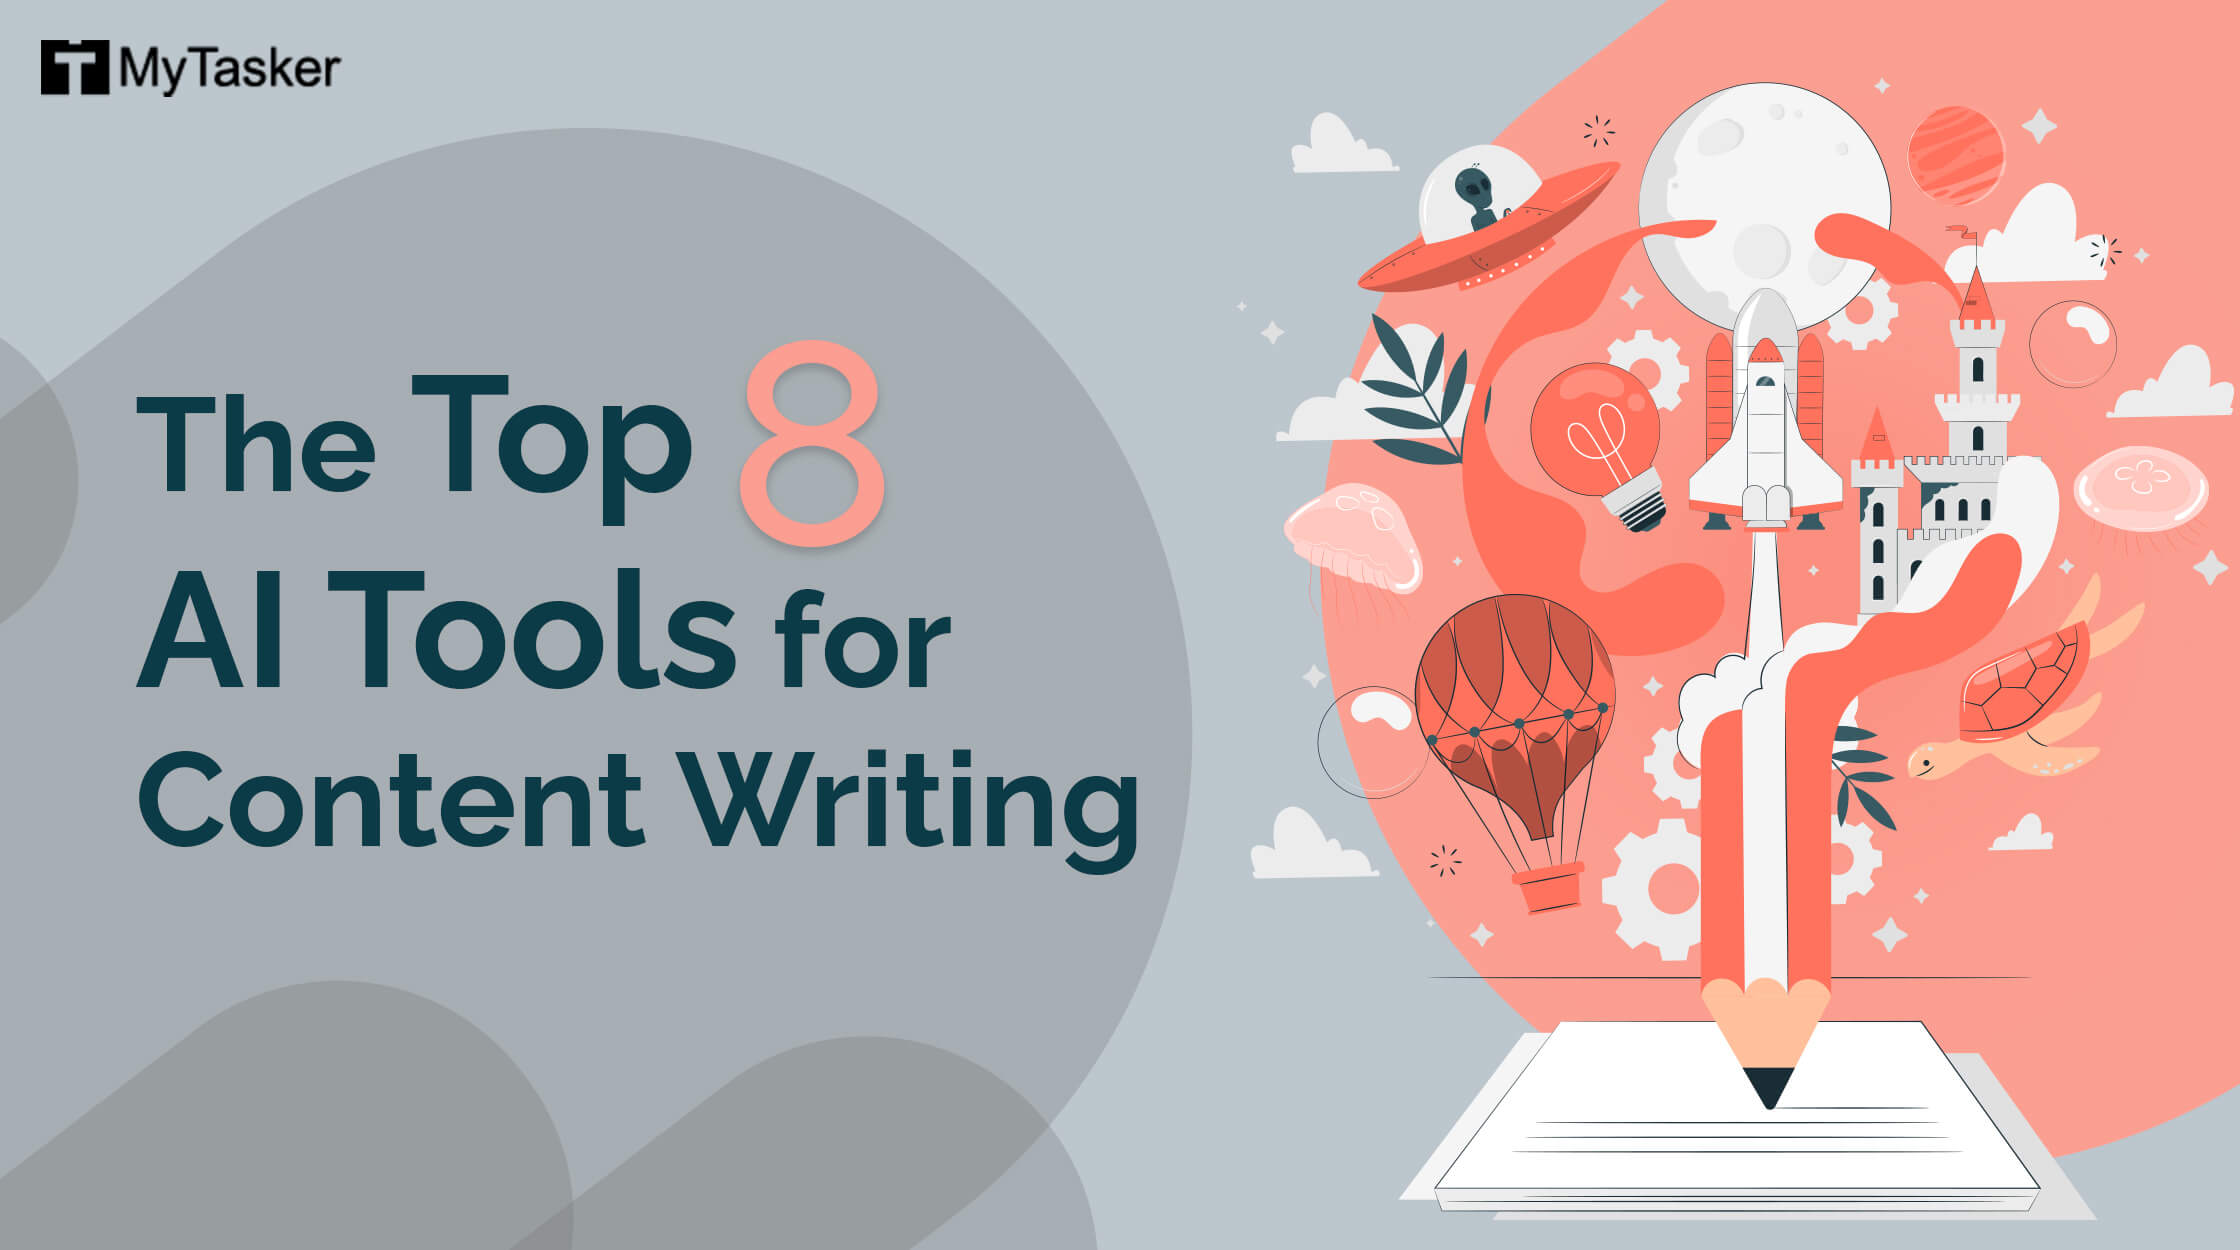 The Top 8 AI Tools for Content Writing